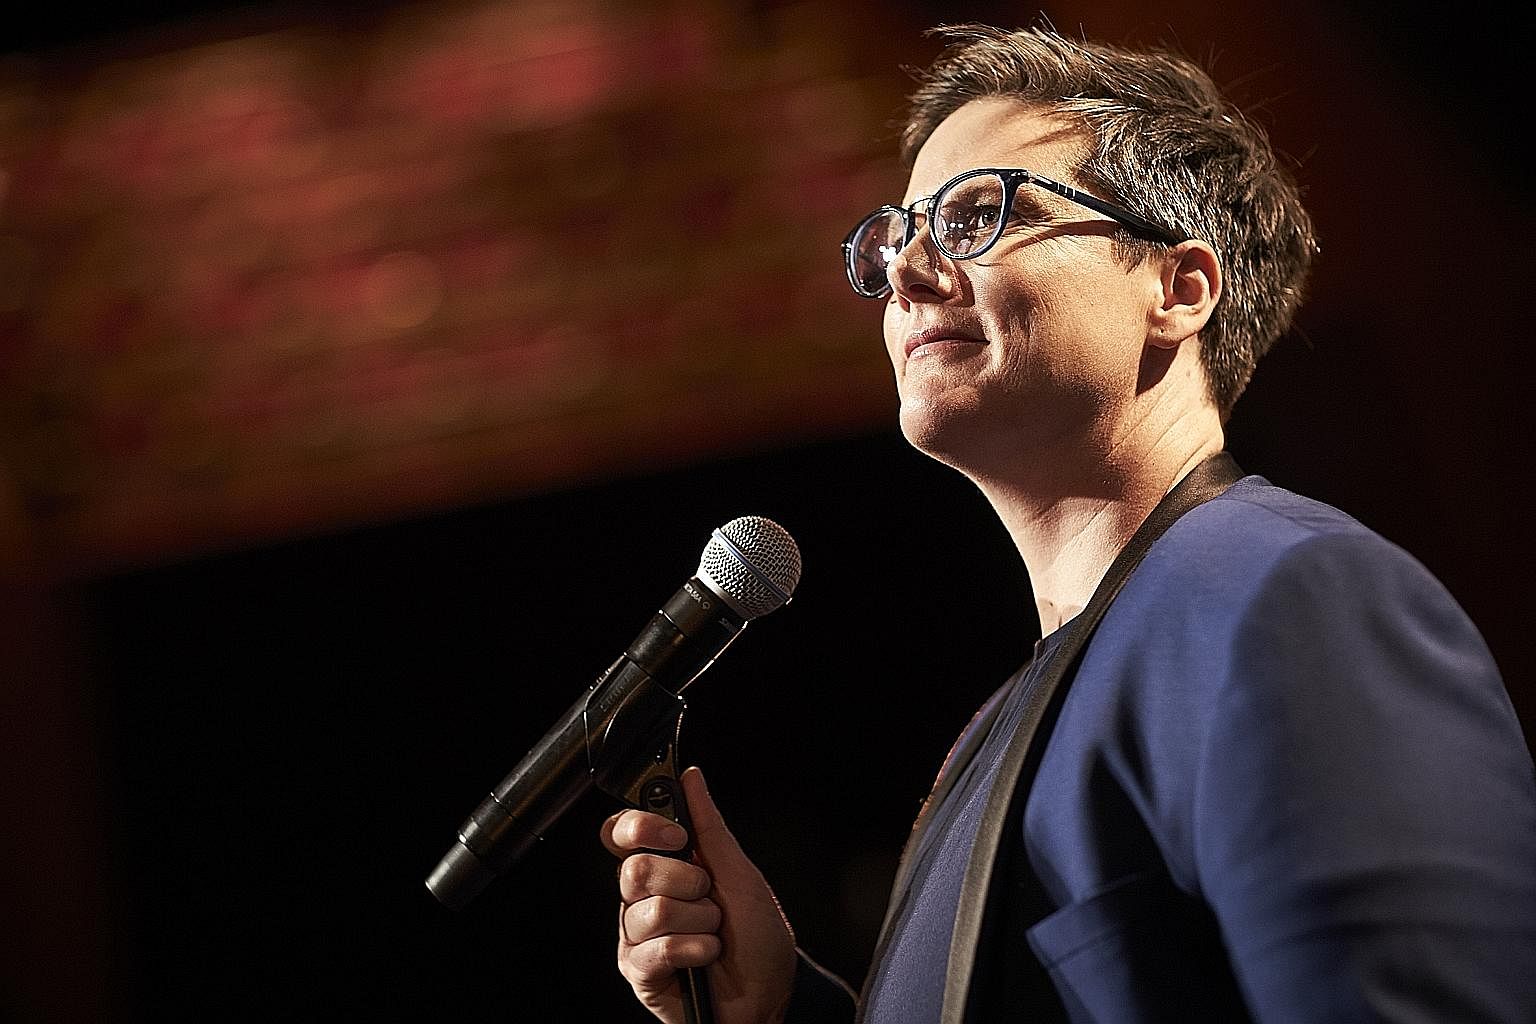 Gay comedienne Hannah Gadsby (above) does a blistering takedown of patriarchal power and shows raw emotion in her Netflix special Nanette, while Sacha Baron Cohen (left) reveals divisions in modern America as three characters in Who Is America?.